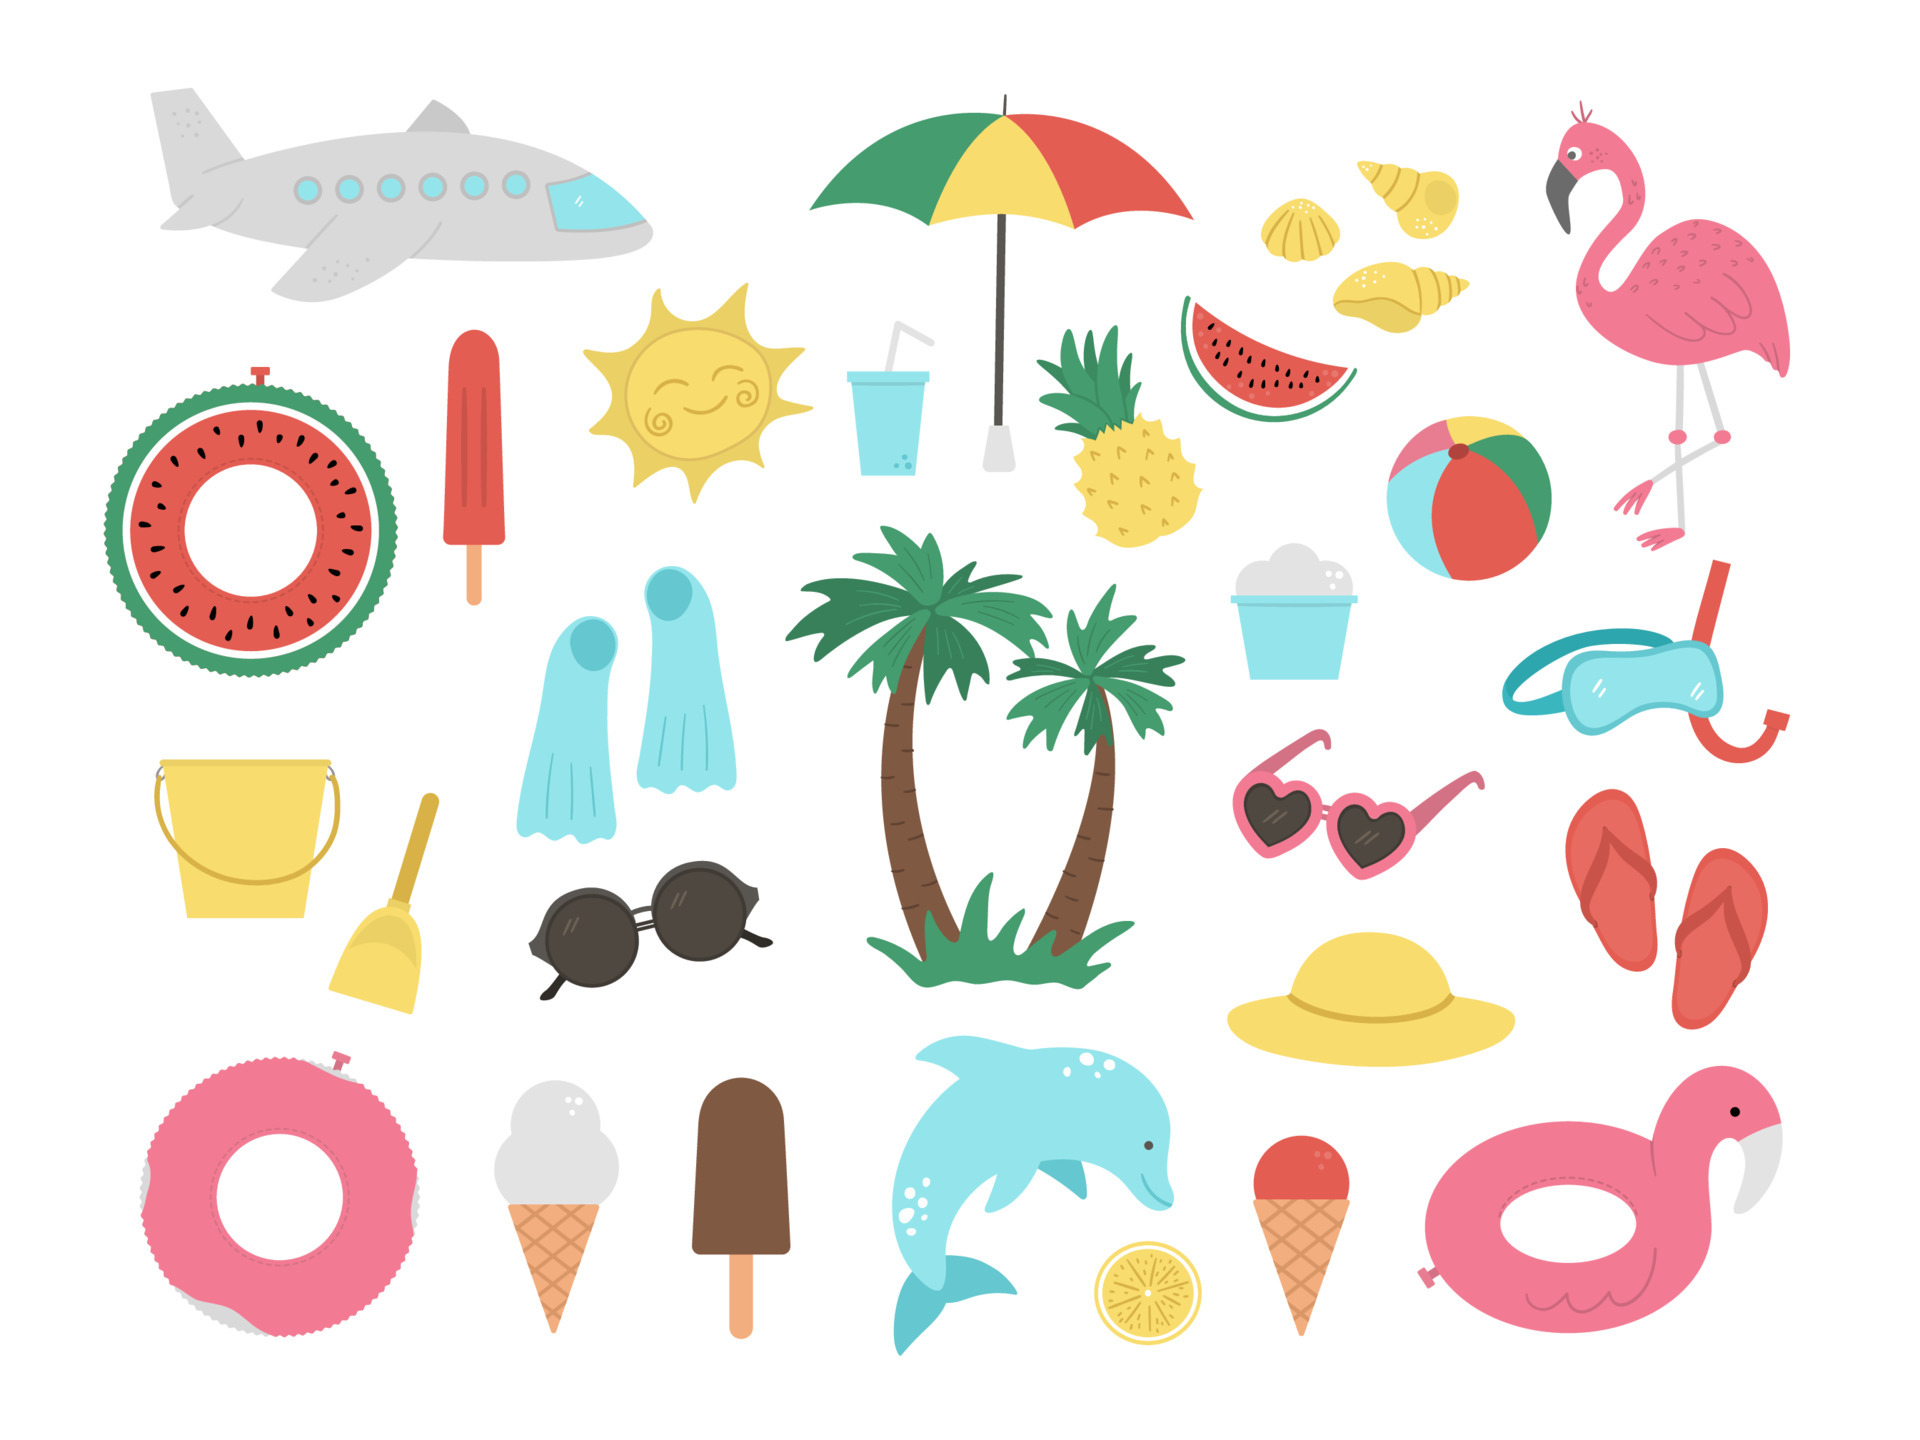 Vector set of summer clipart elements isolated on white background. Cute flat illustration for kids with palm tree, plane, sunglasses, funny inflatable rings. Vacation beach objects